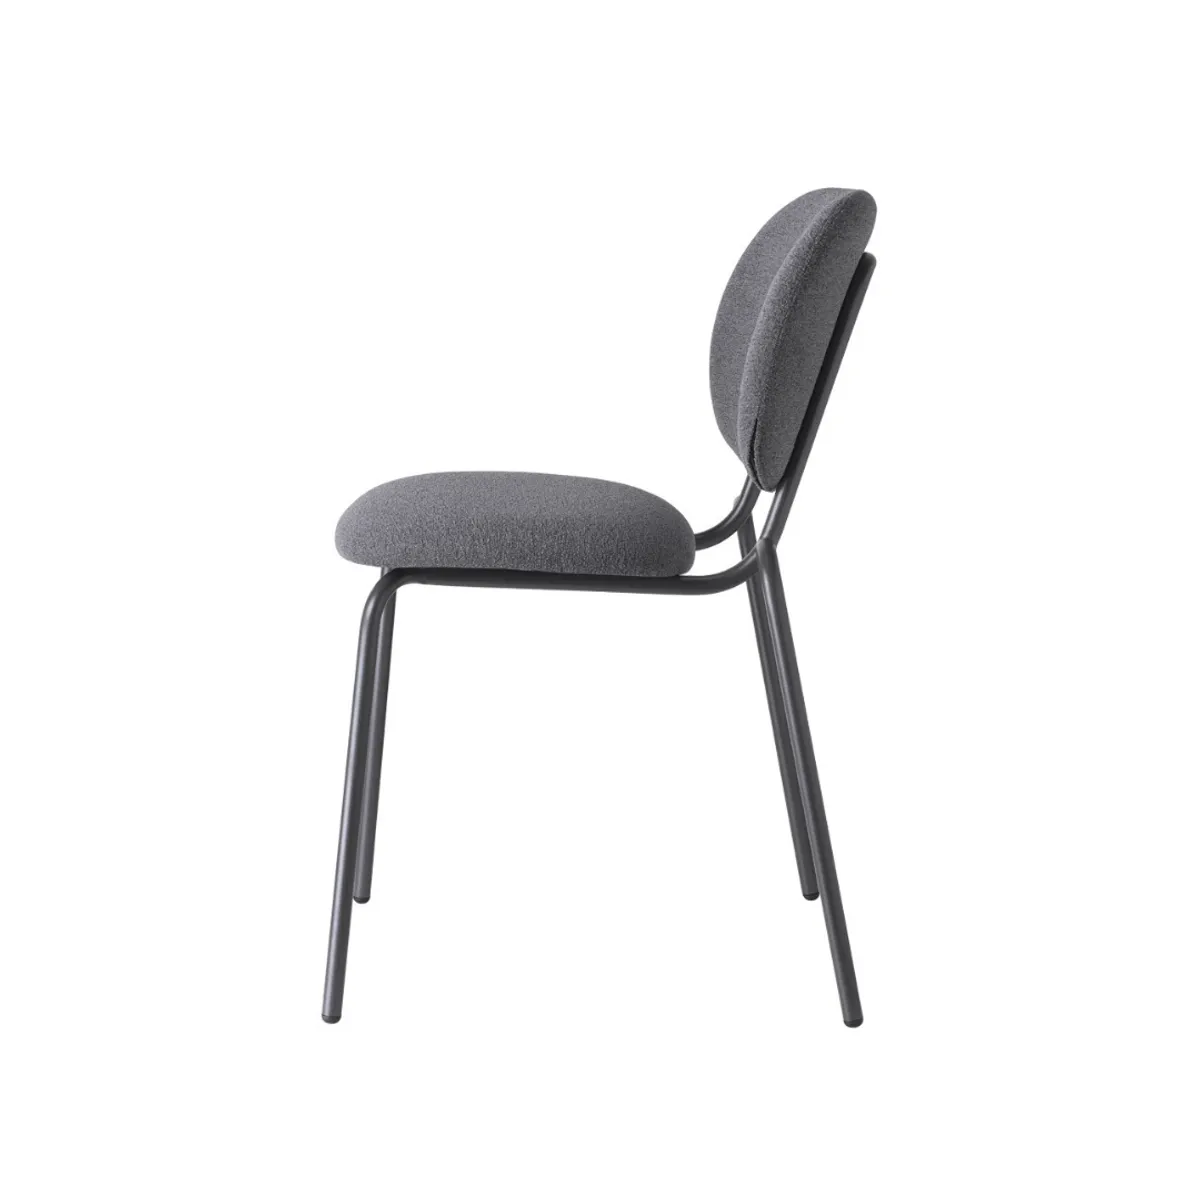 Layla soft side chair 5